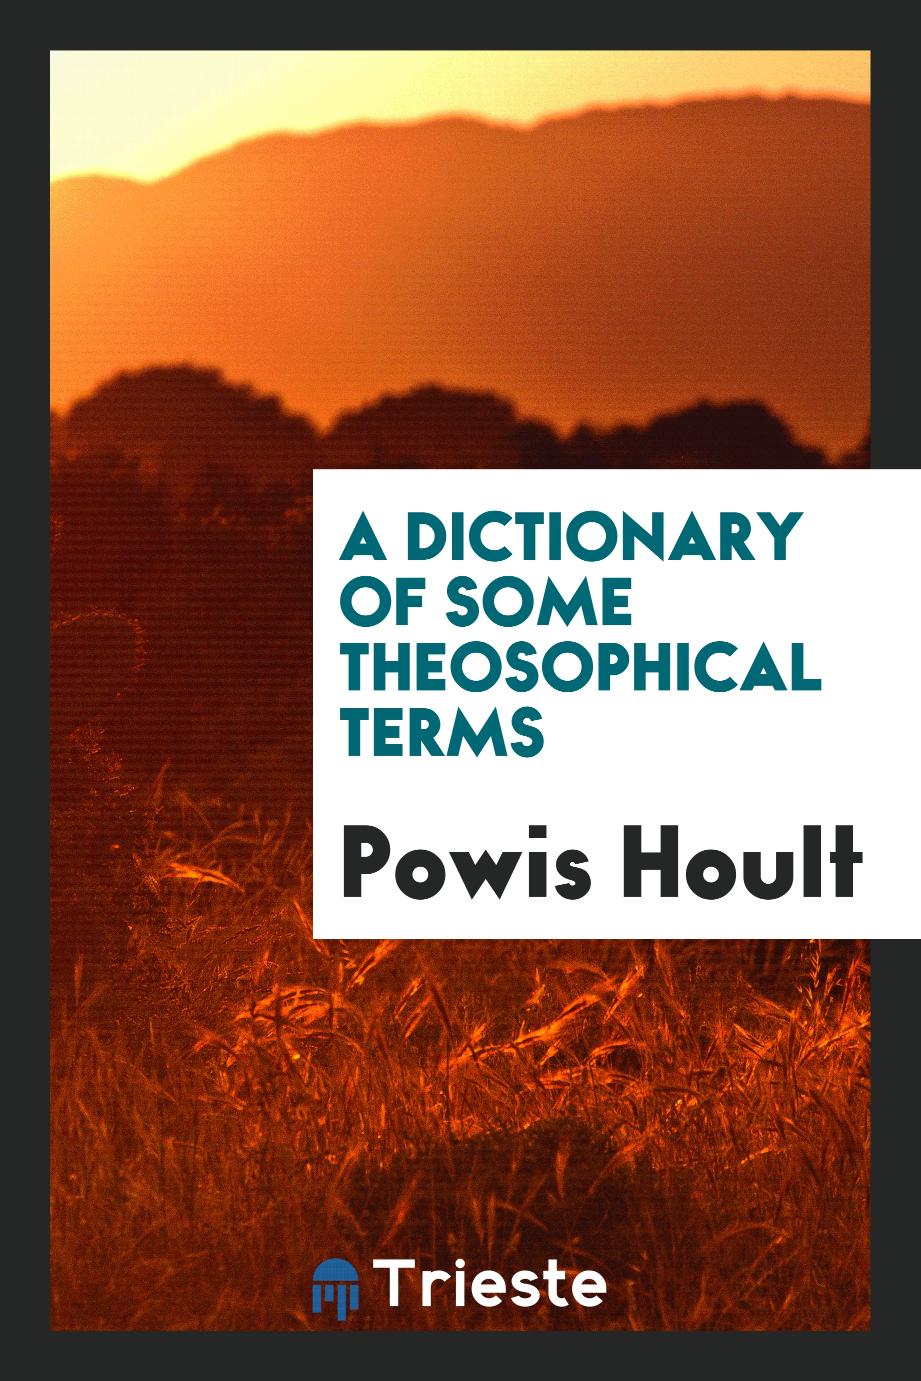 A Dictionary of Some Theosophical Terms